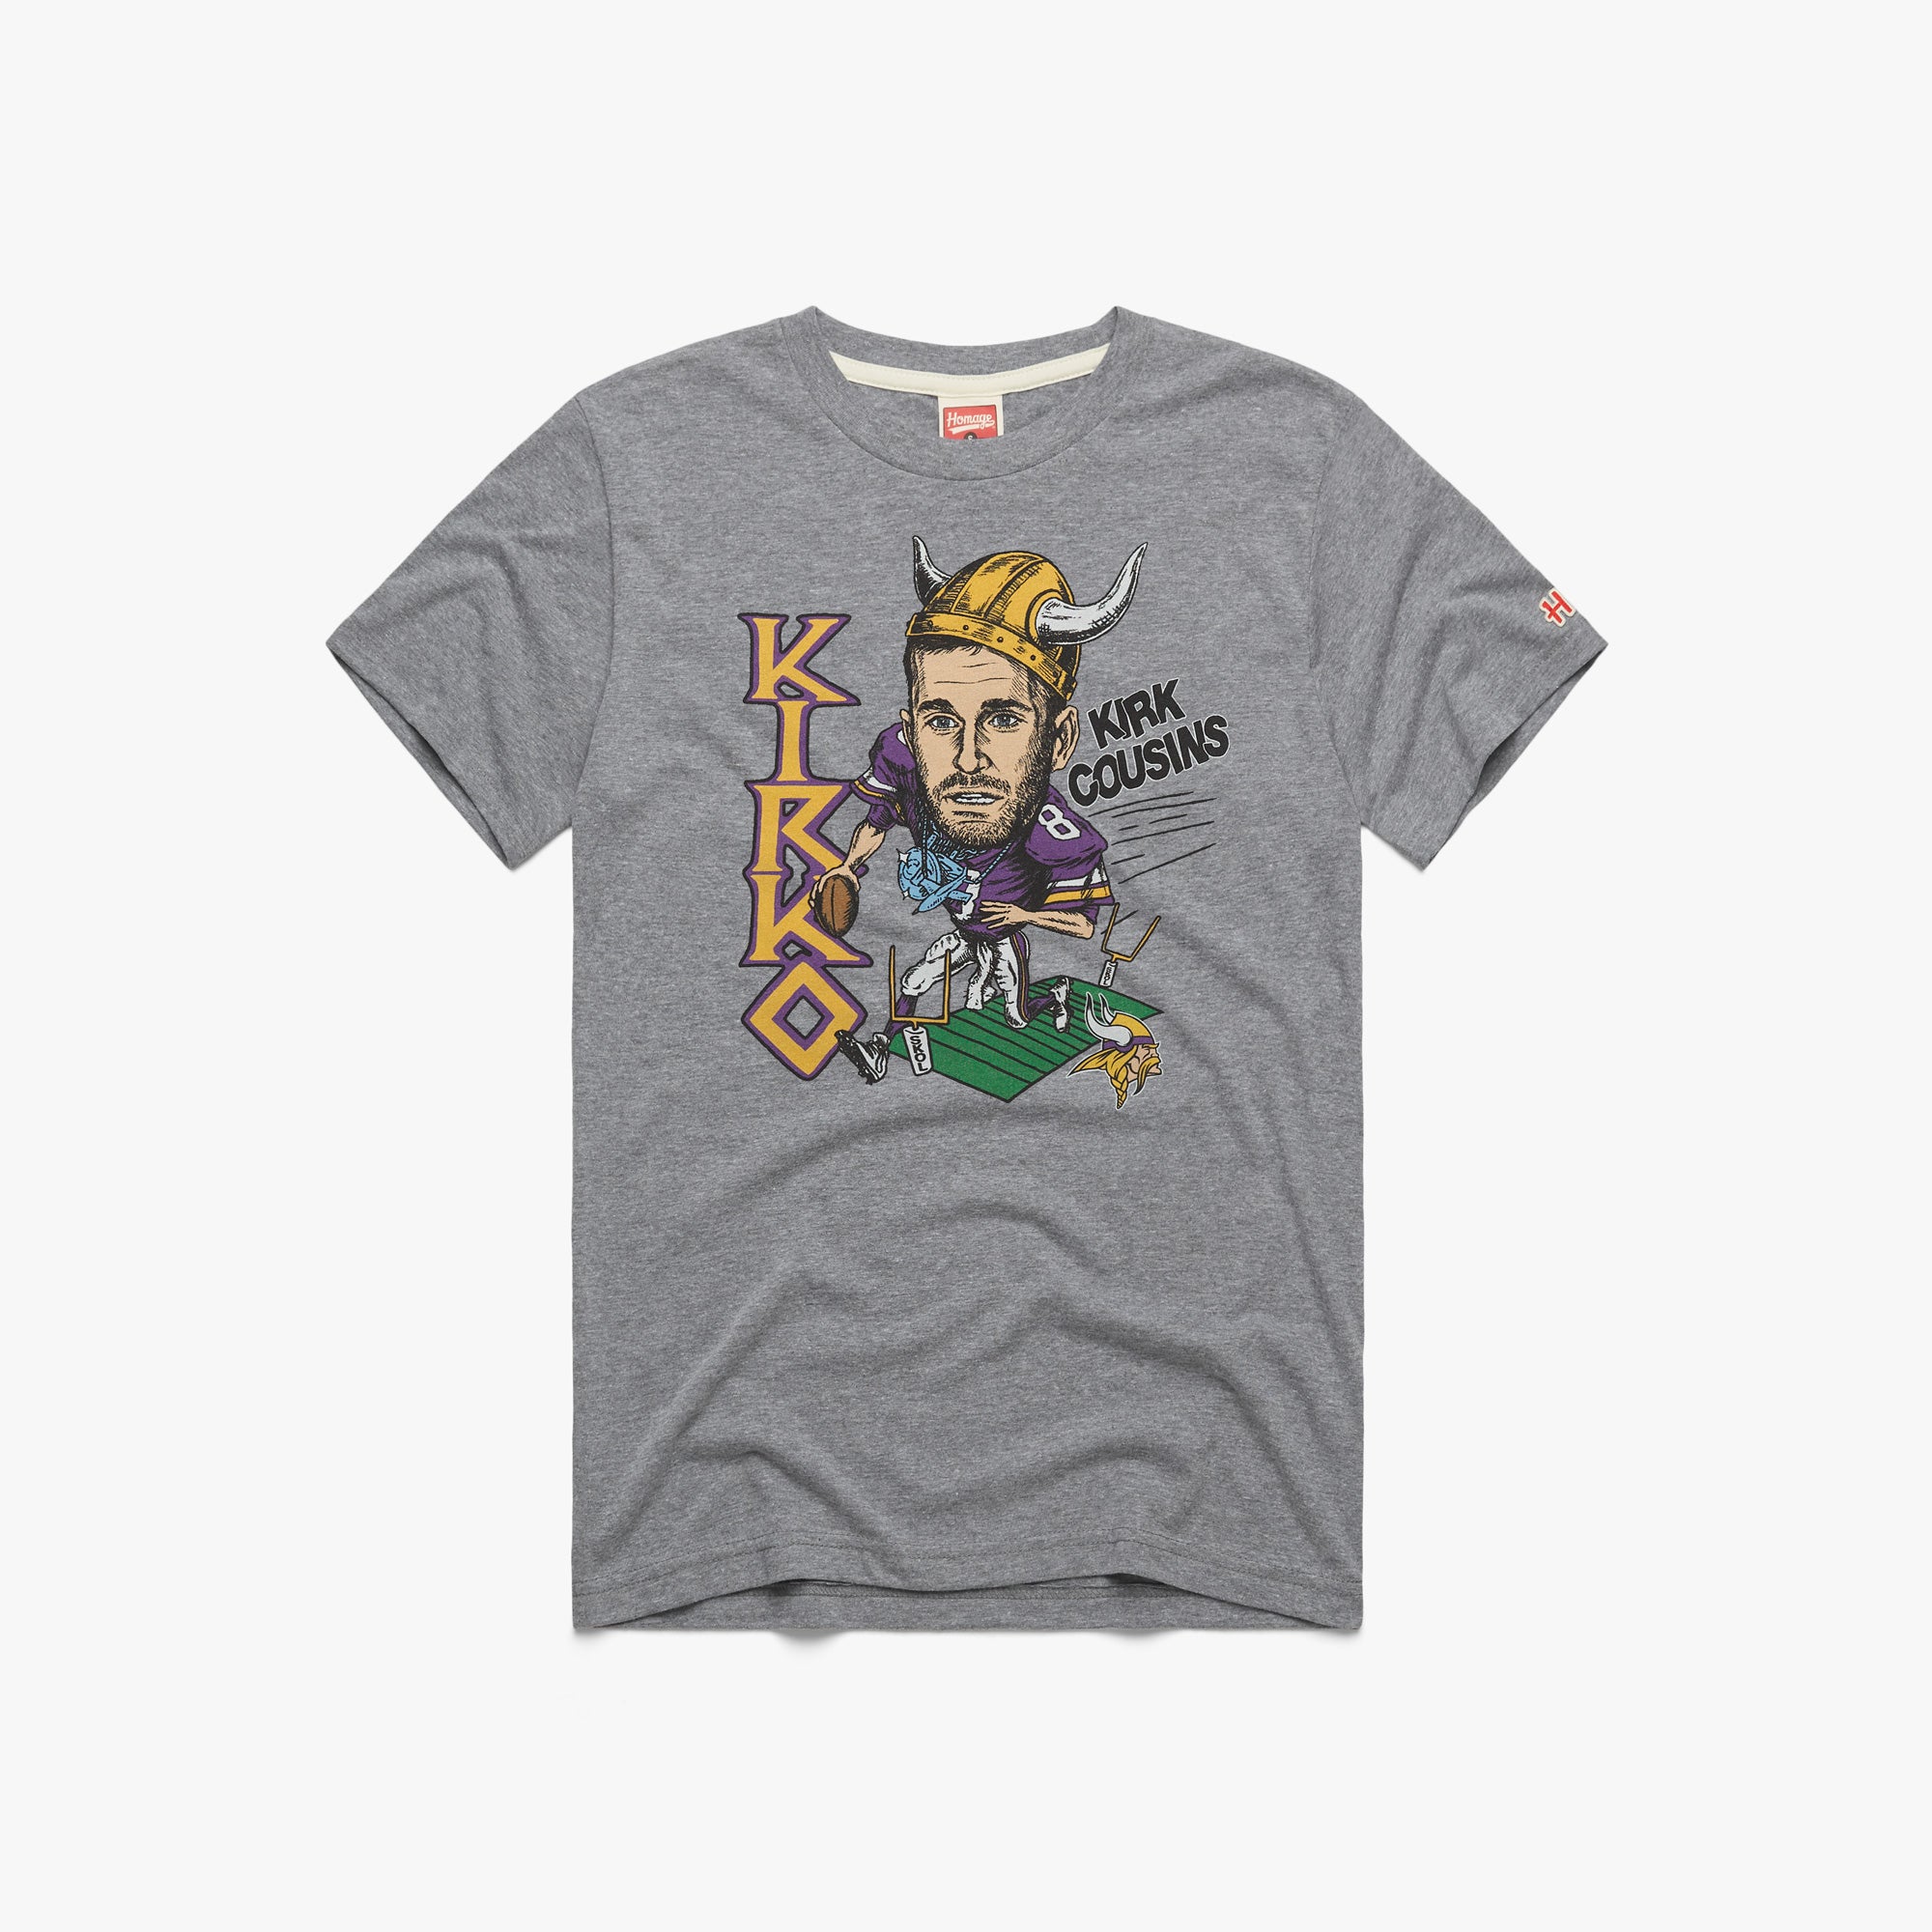 Minnesota Vikings Kirk Cousins T-Shirt from Homage. | Officially Licensed Vintage NFL Apparel from Homage Pro Shop.